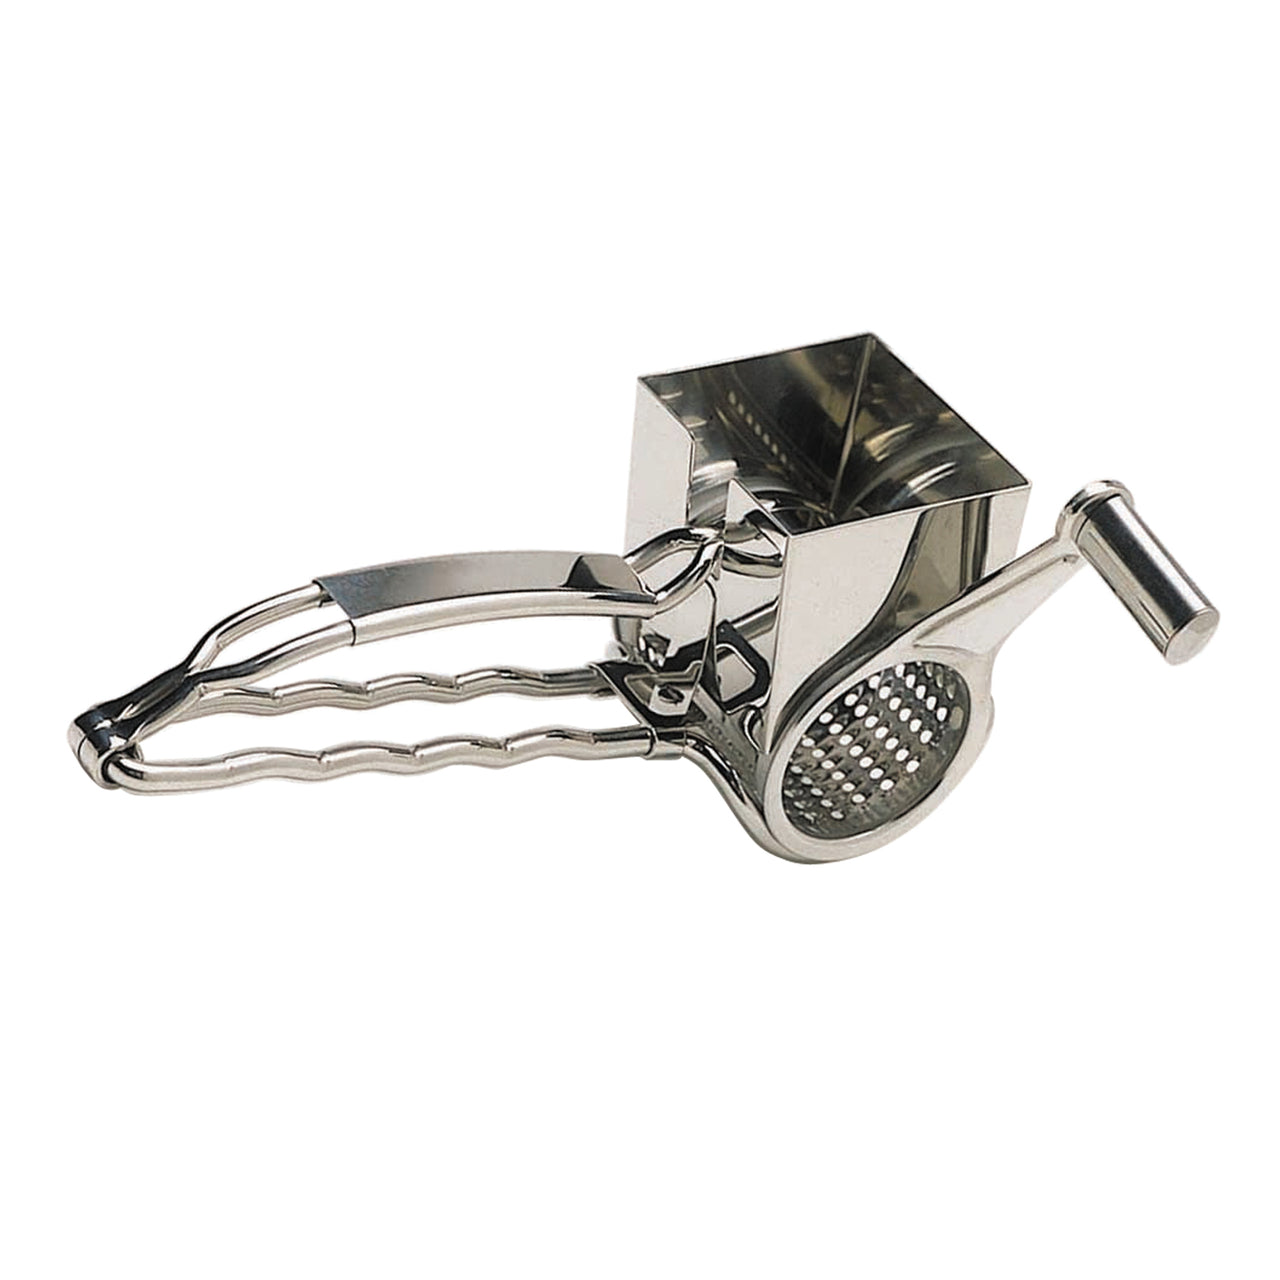 Cuisinox Stainless Steel Rotary Cheese Grater & Reviews